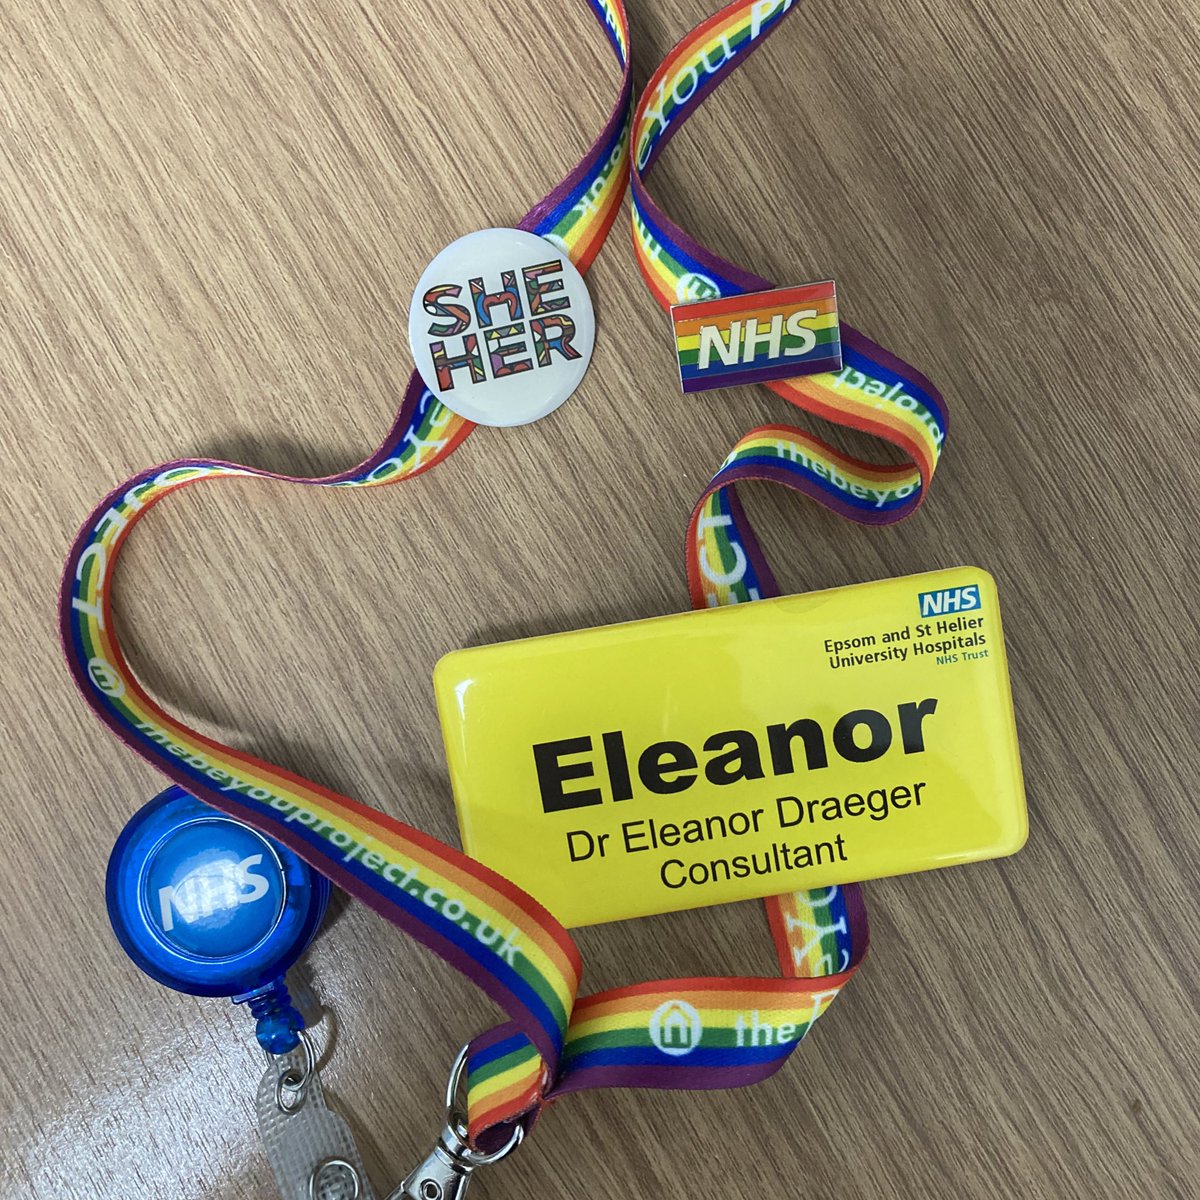 New rainbow lanyard for work. Just making sure that my #LGBTQ patients and colleagues know they are safe with me.